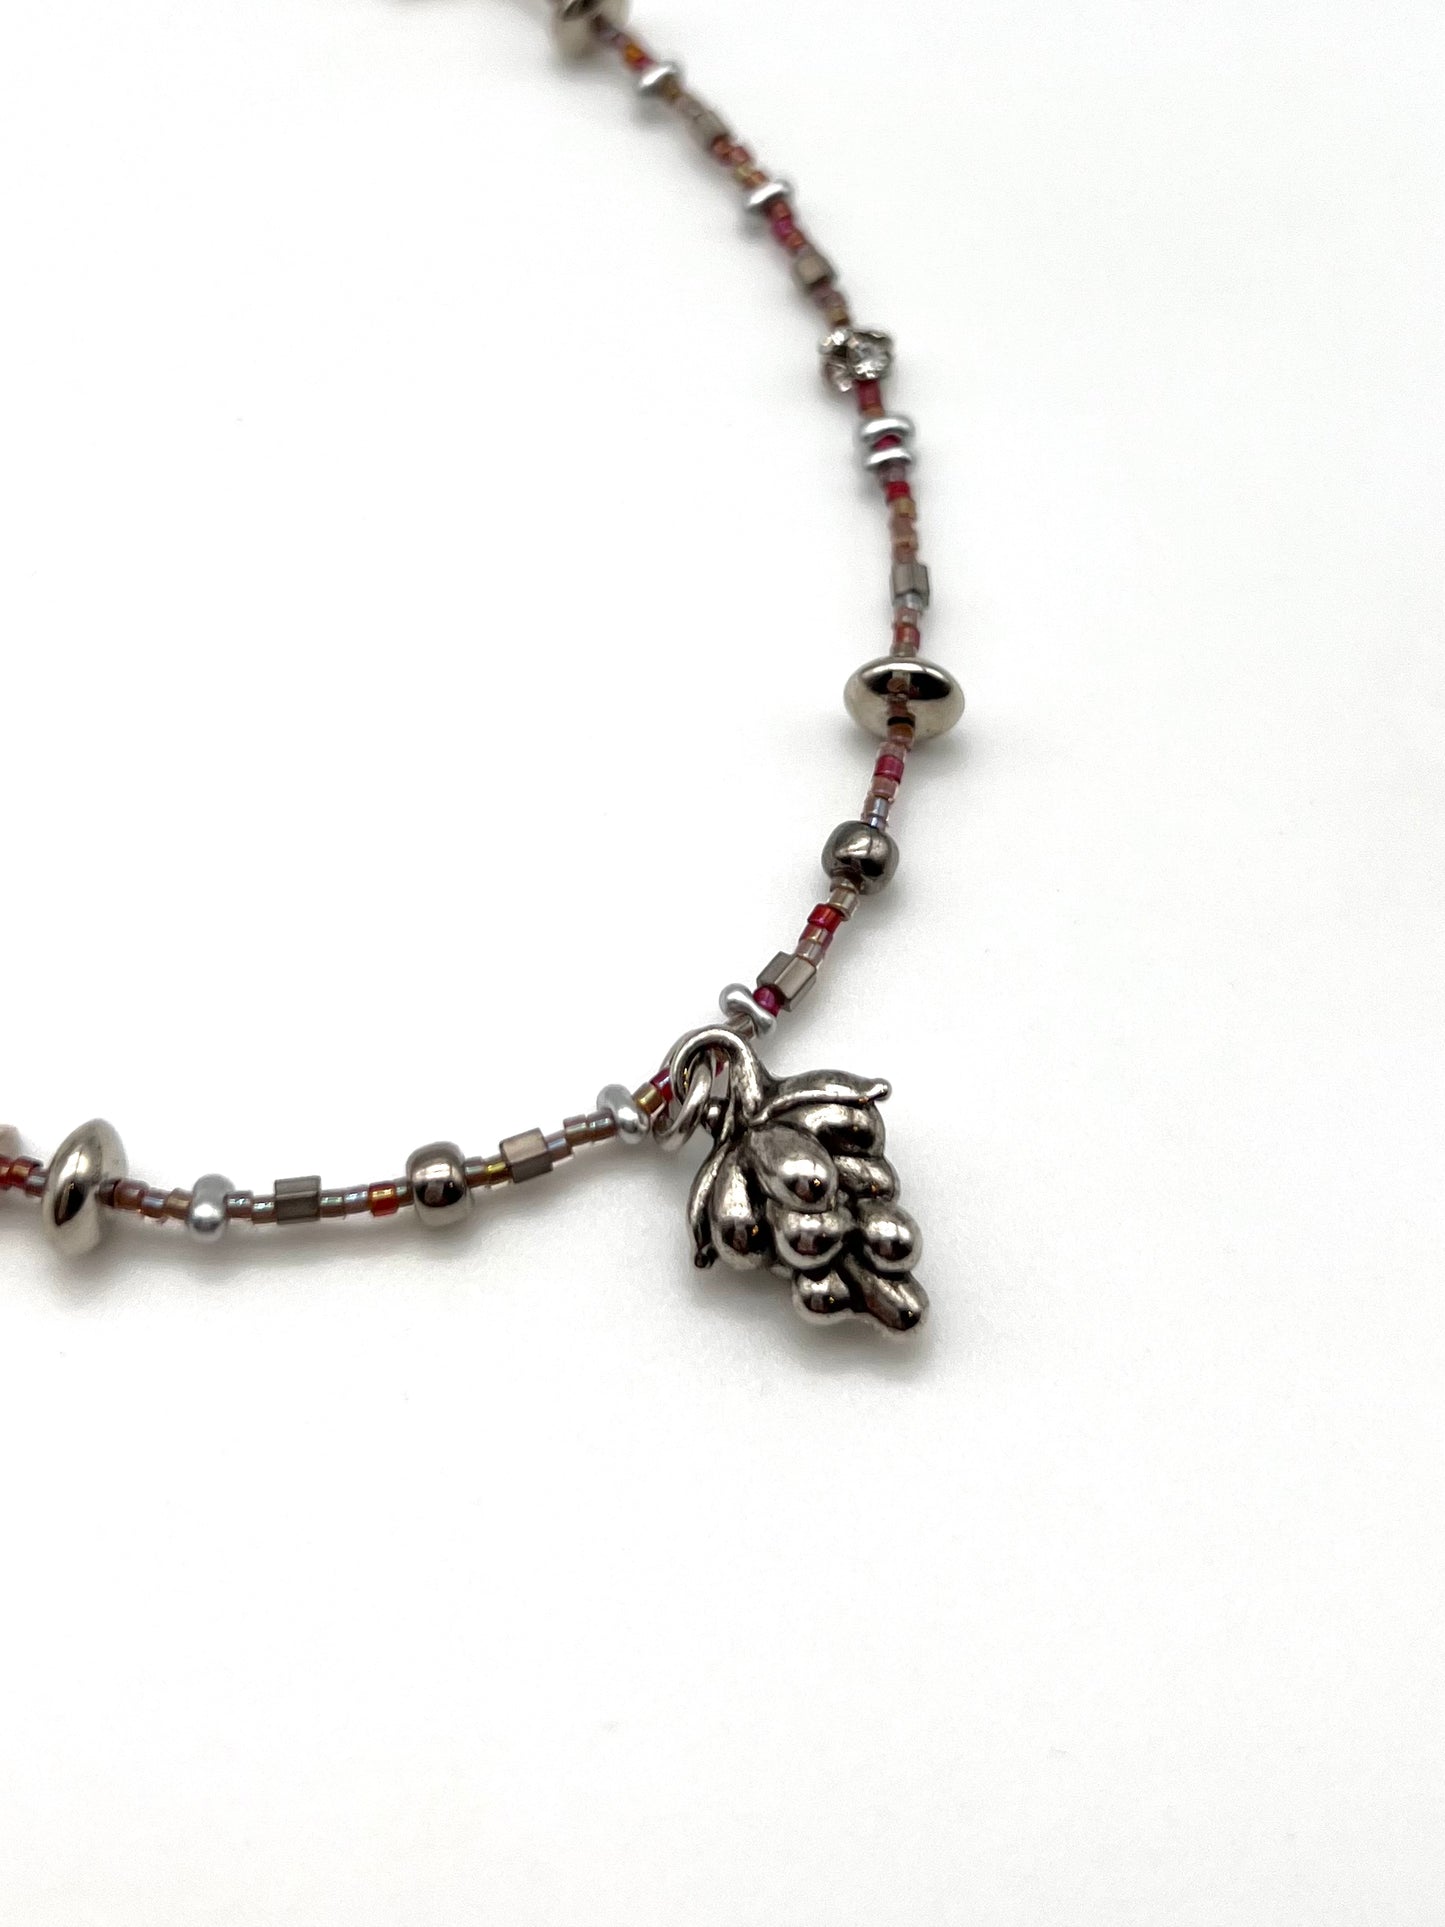 Fruits charm beads necklace